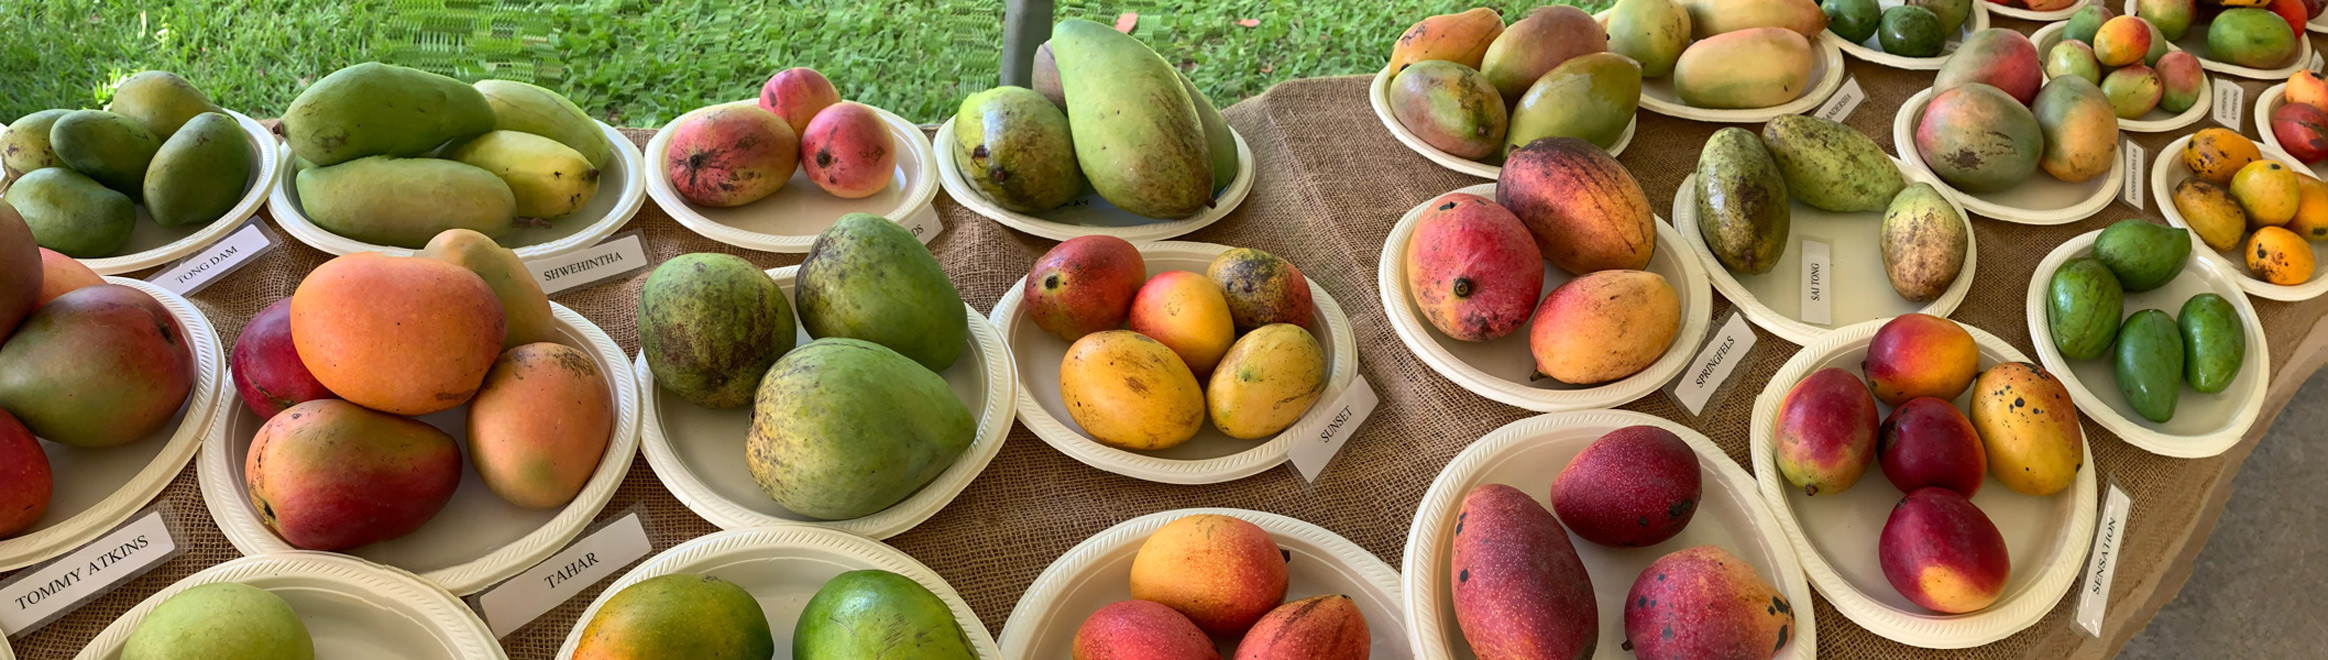 Mango cultivars at Fruit and Spice Park